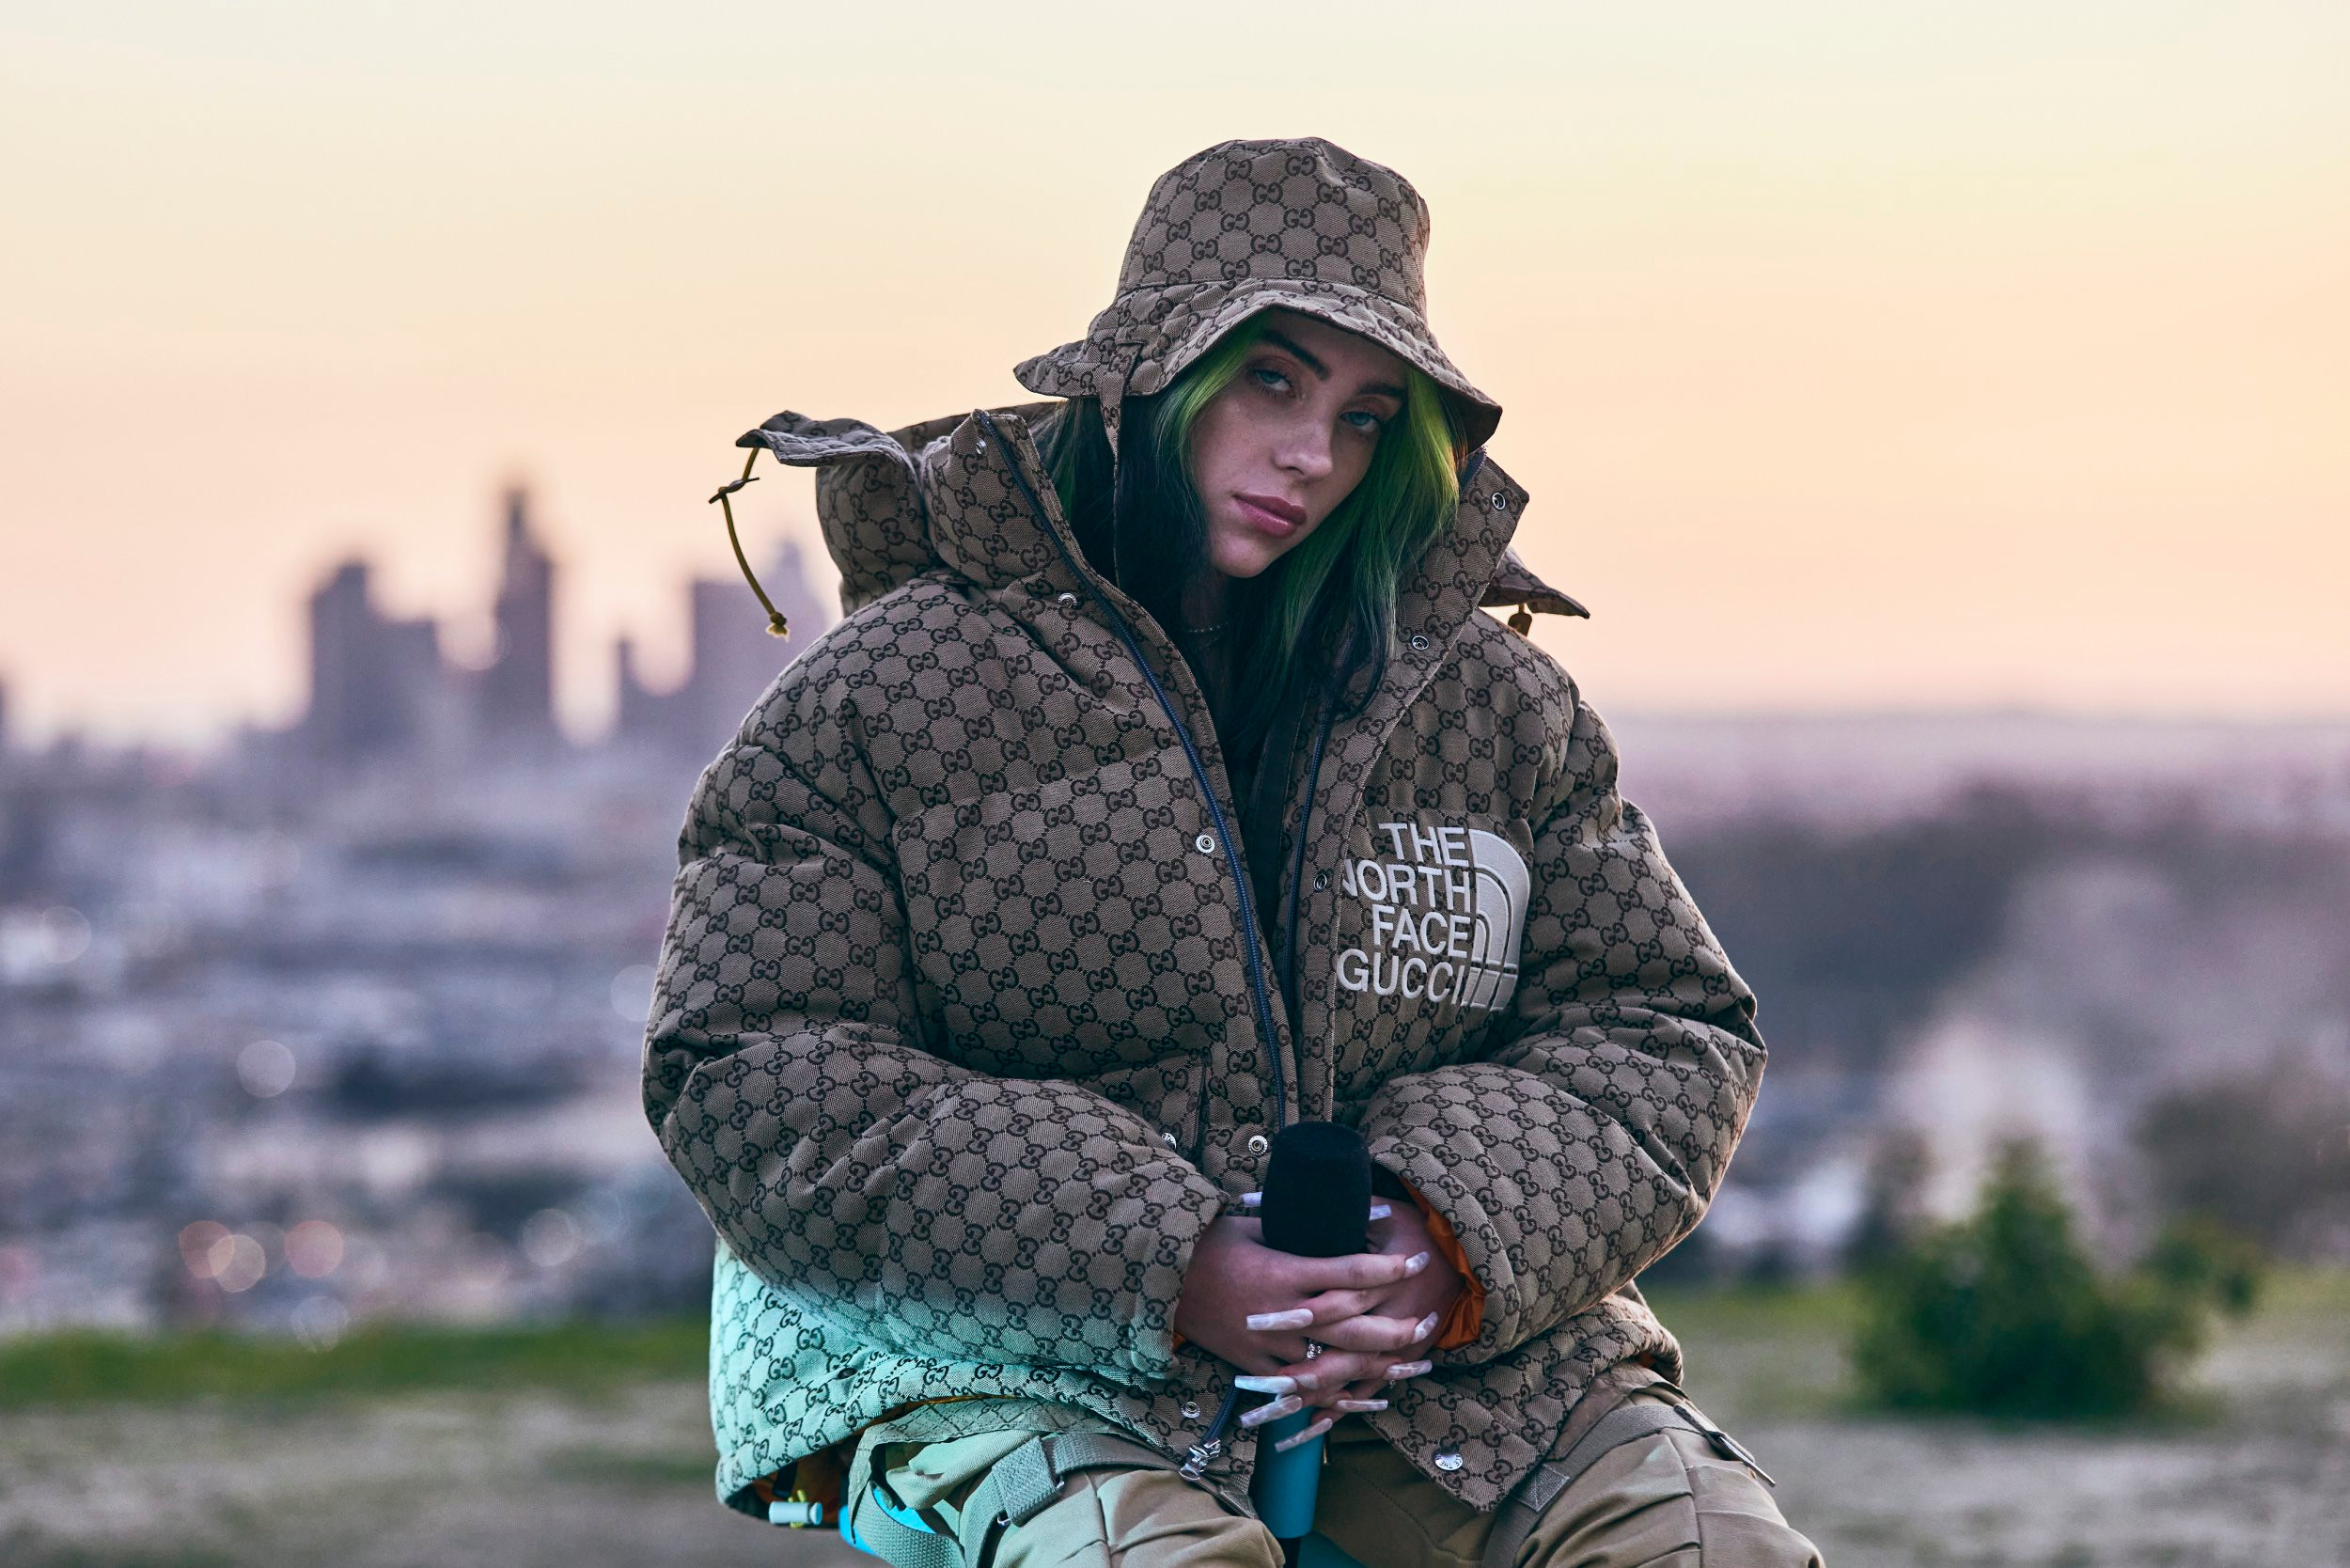 Billie Eilish reflects on heartbreaking relationship and split for first time: ‘I can’t fix him, I’ve tried’